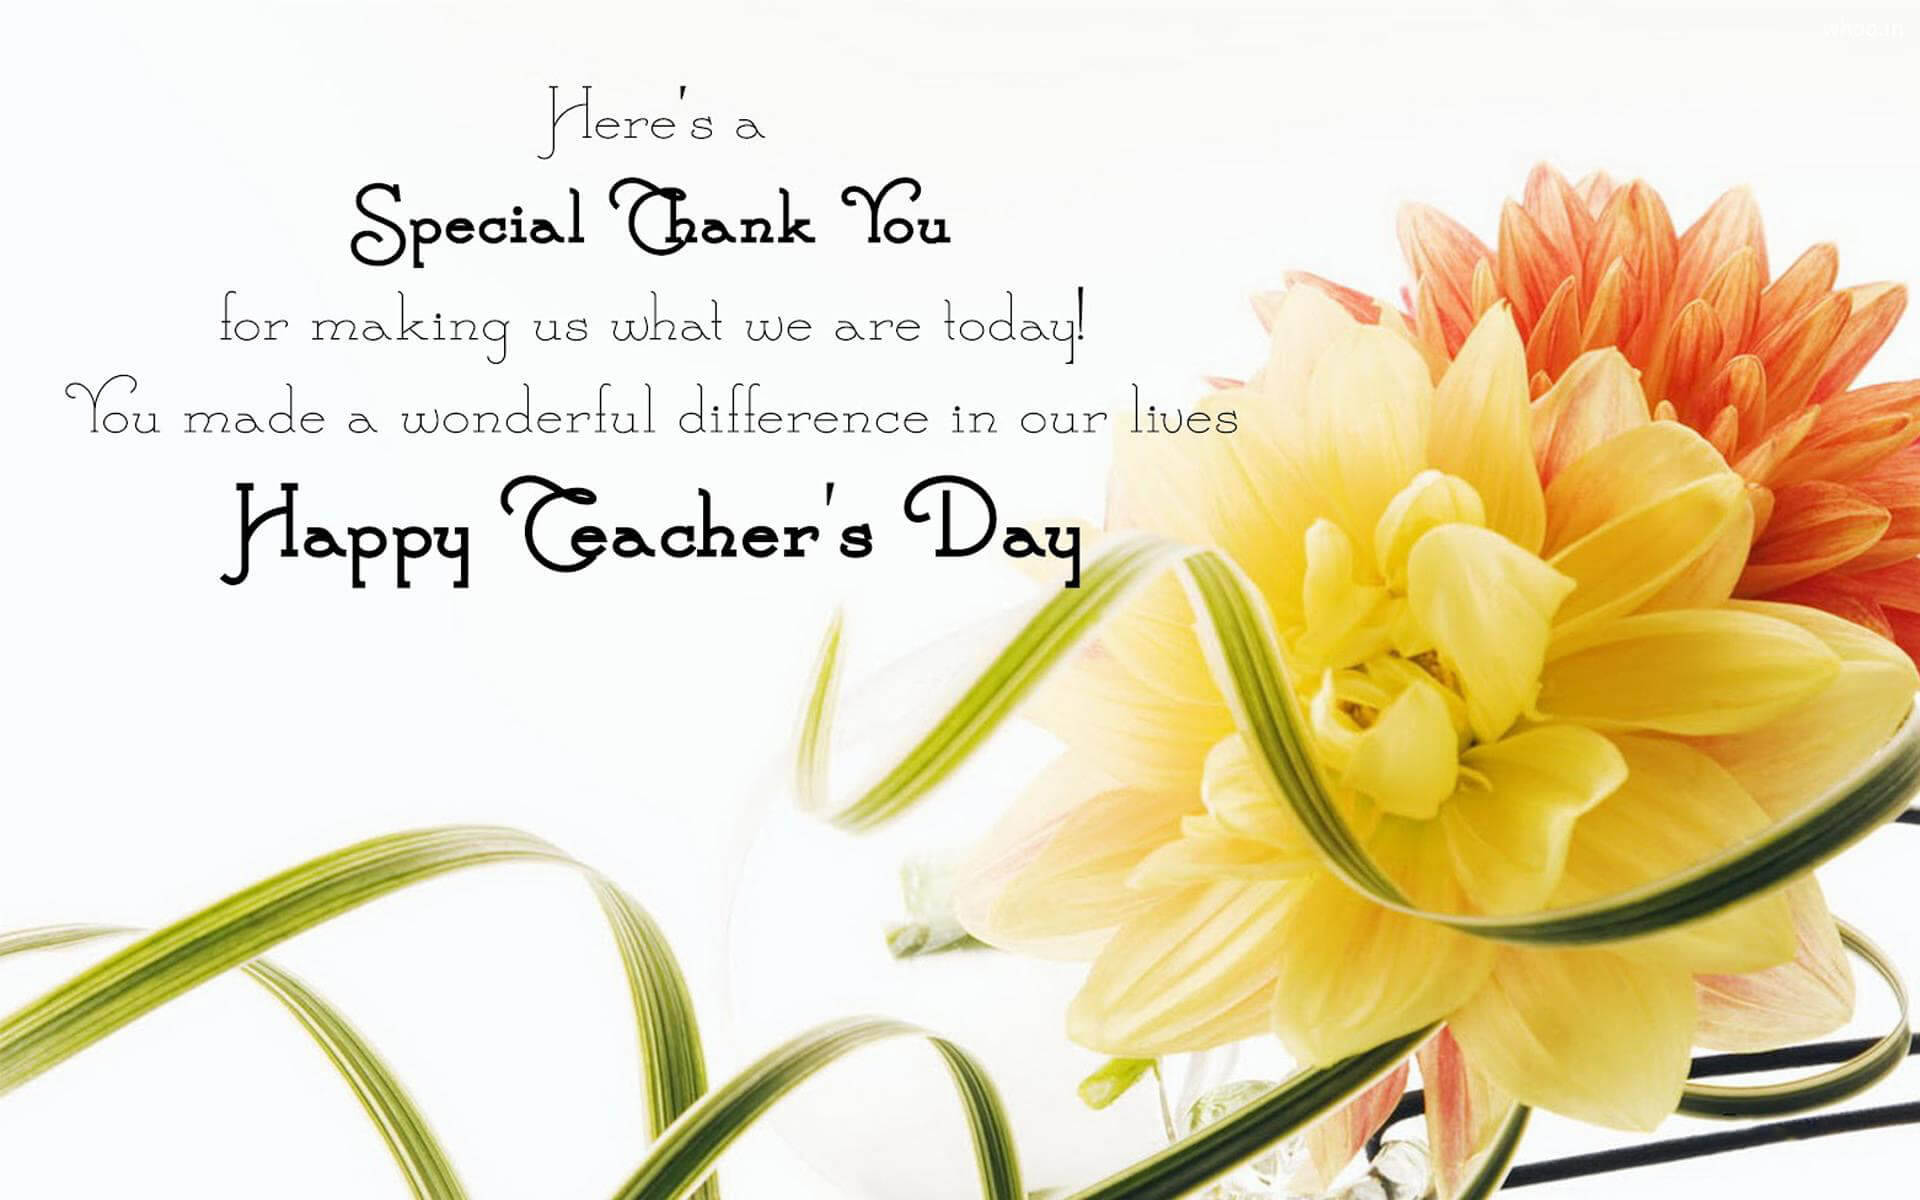 Happy Teachers' Day Special Thank You Background